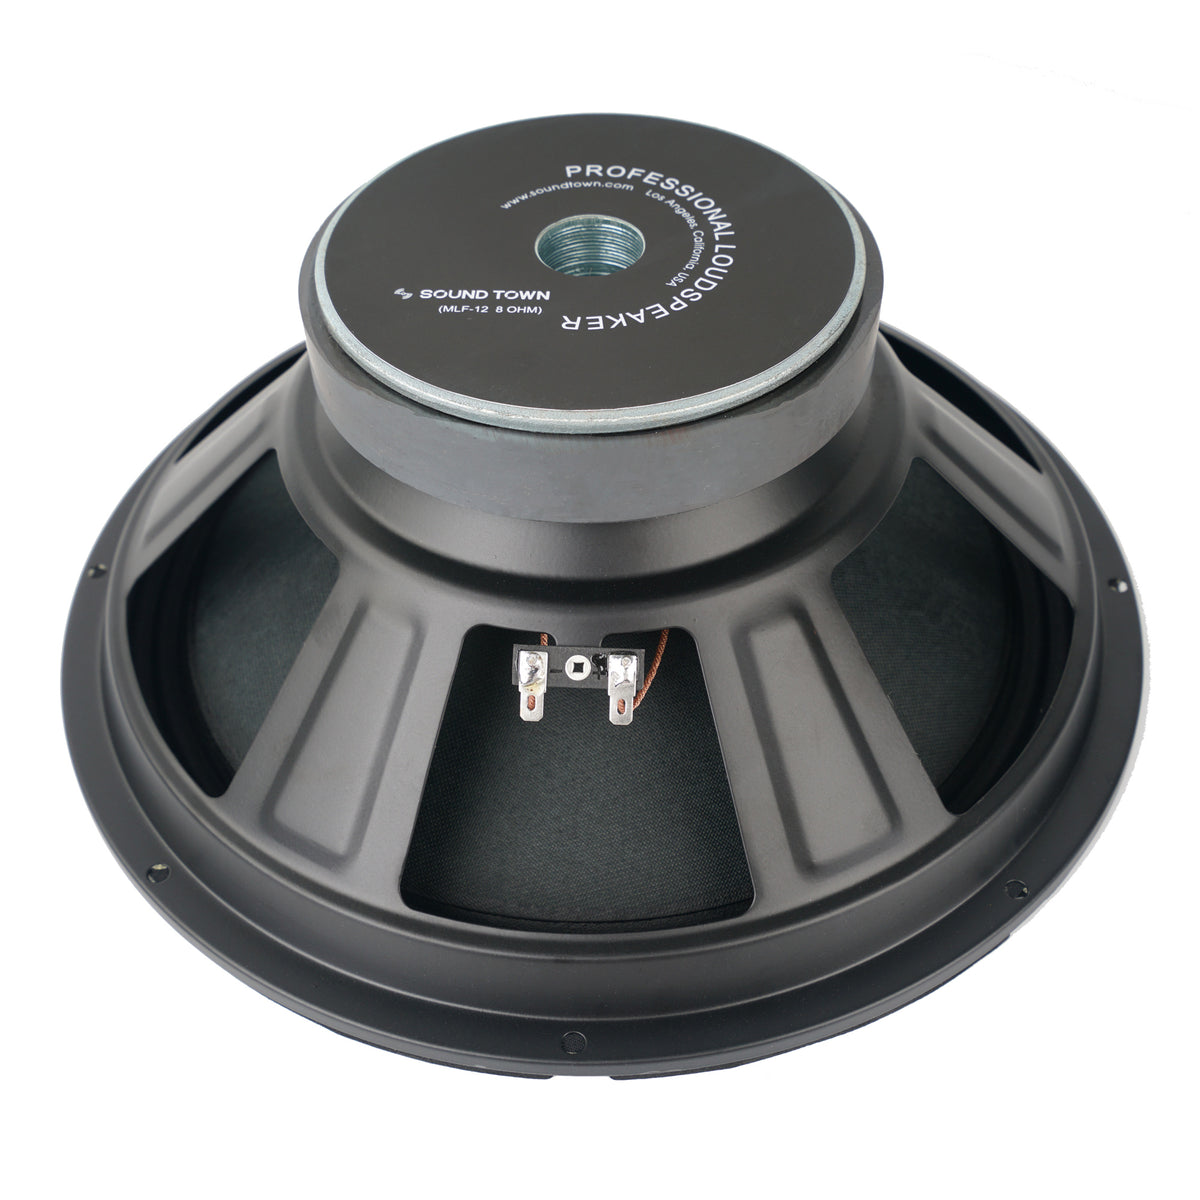 Sound Town 12” Replacement Subwoofer (MLF-12)